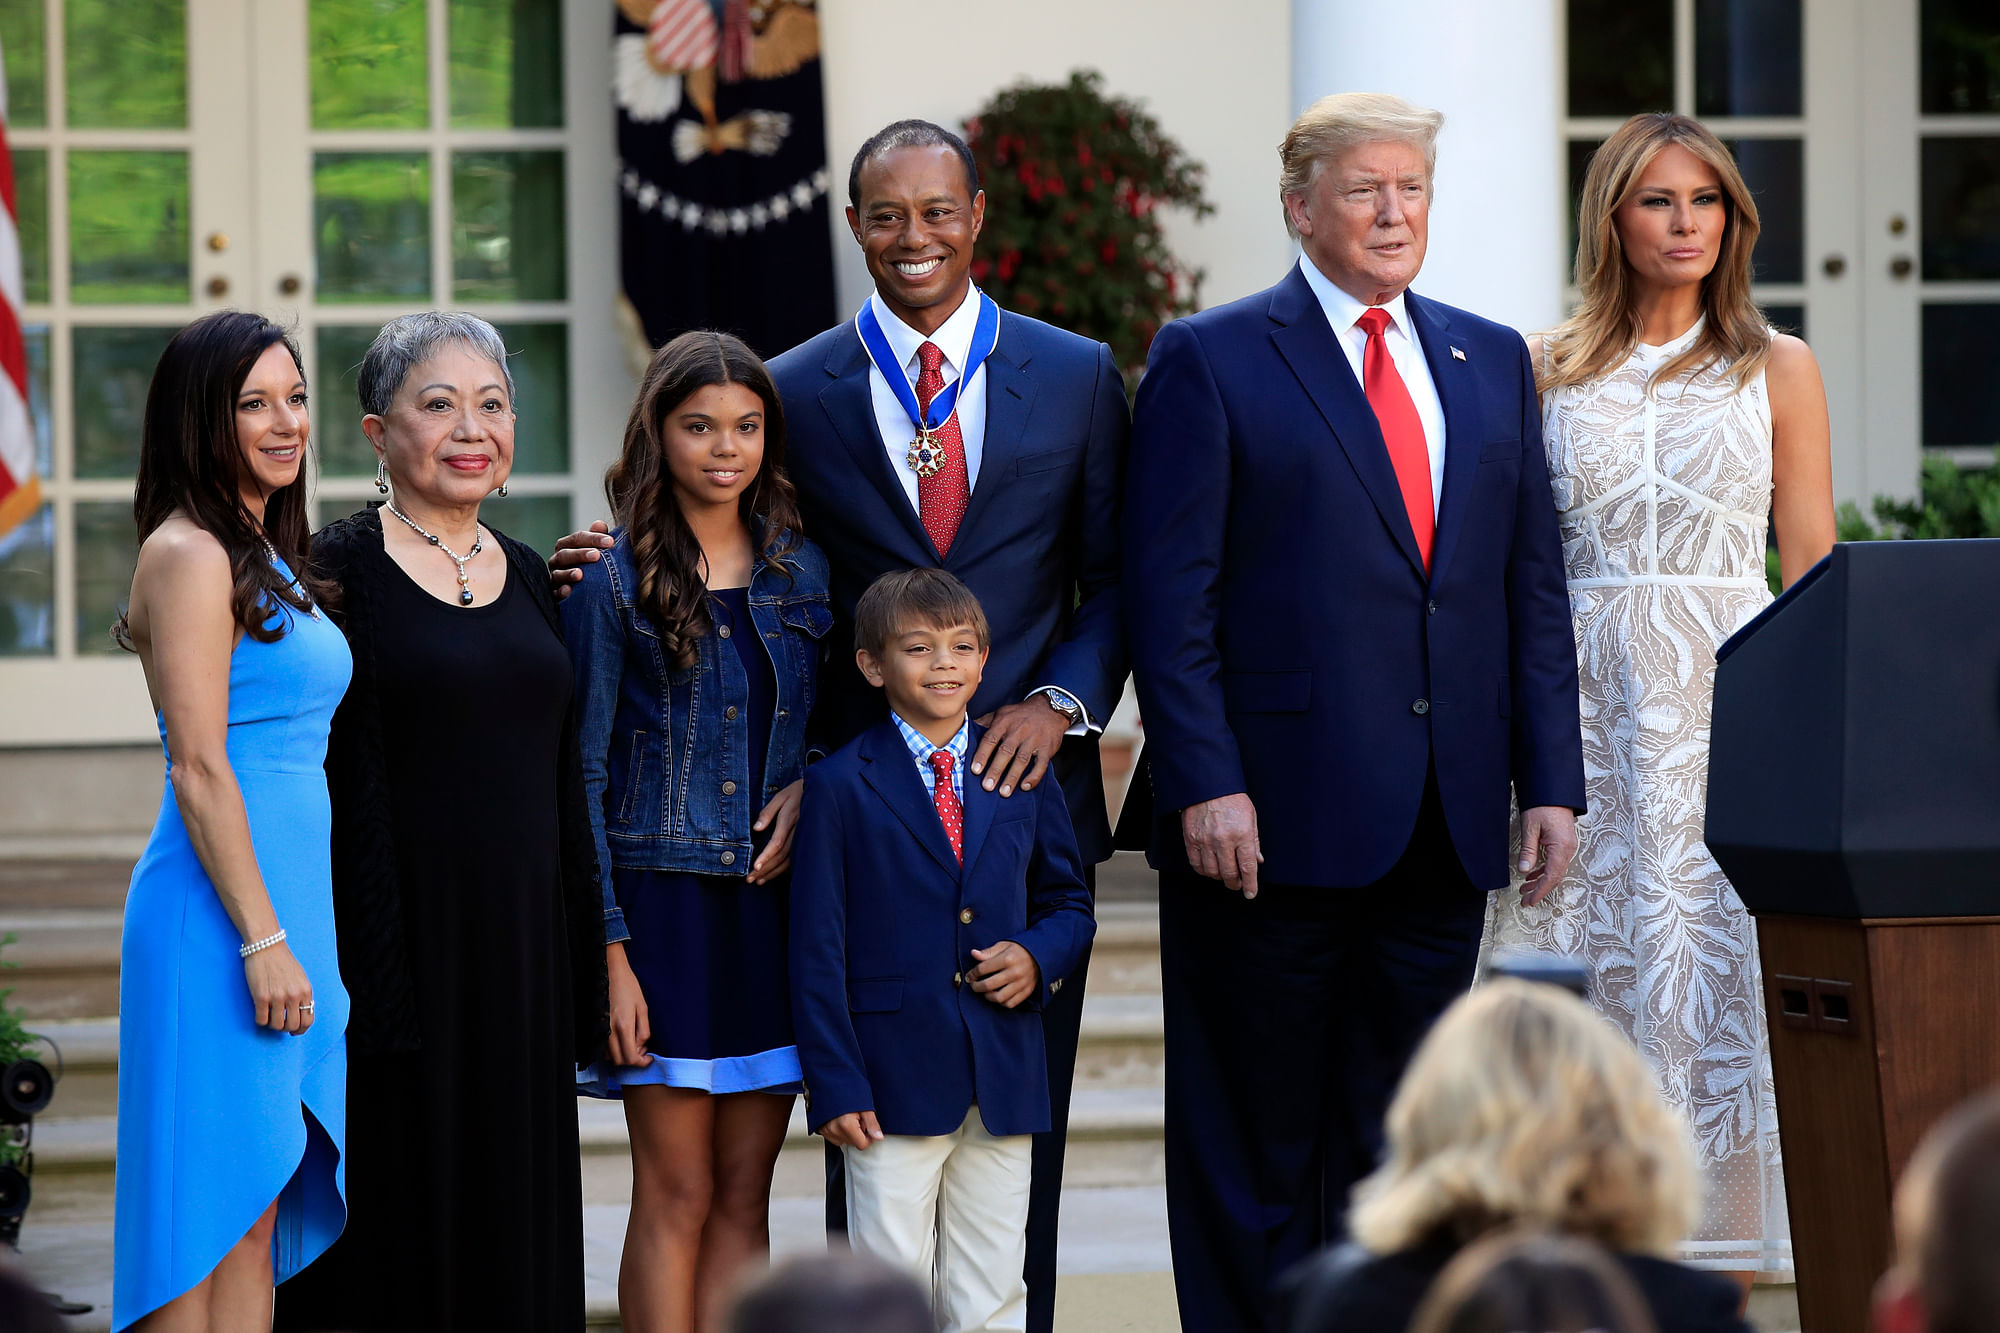 Trump awarded Woods with the Presidential Medal of Freedom. He’s the fourth golfer to earn that distinction and certainly the youngest.